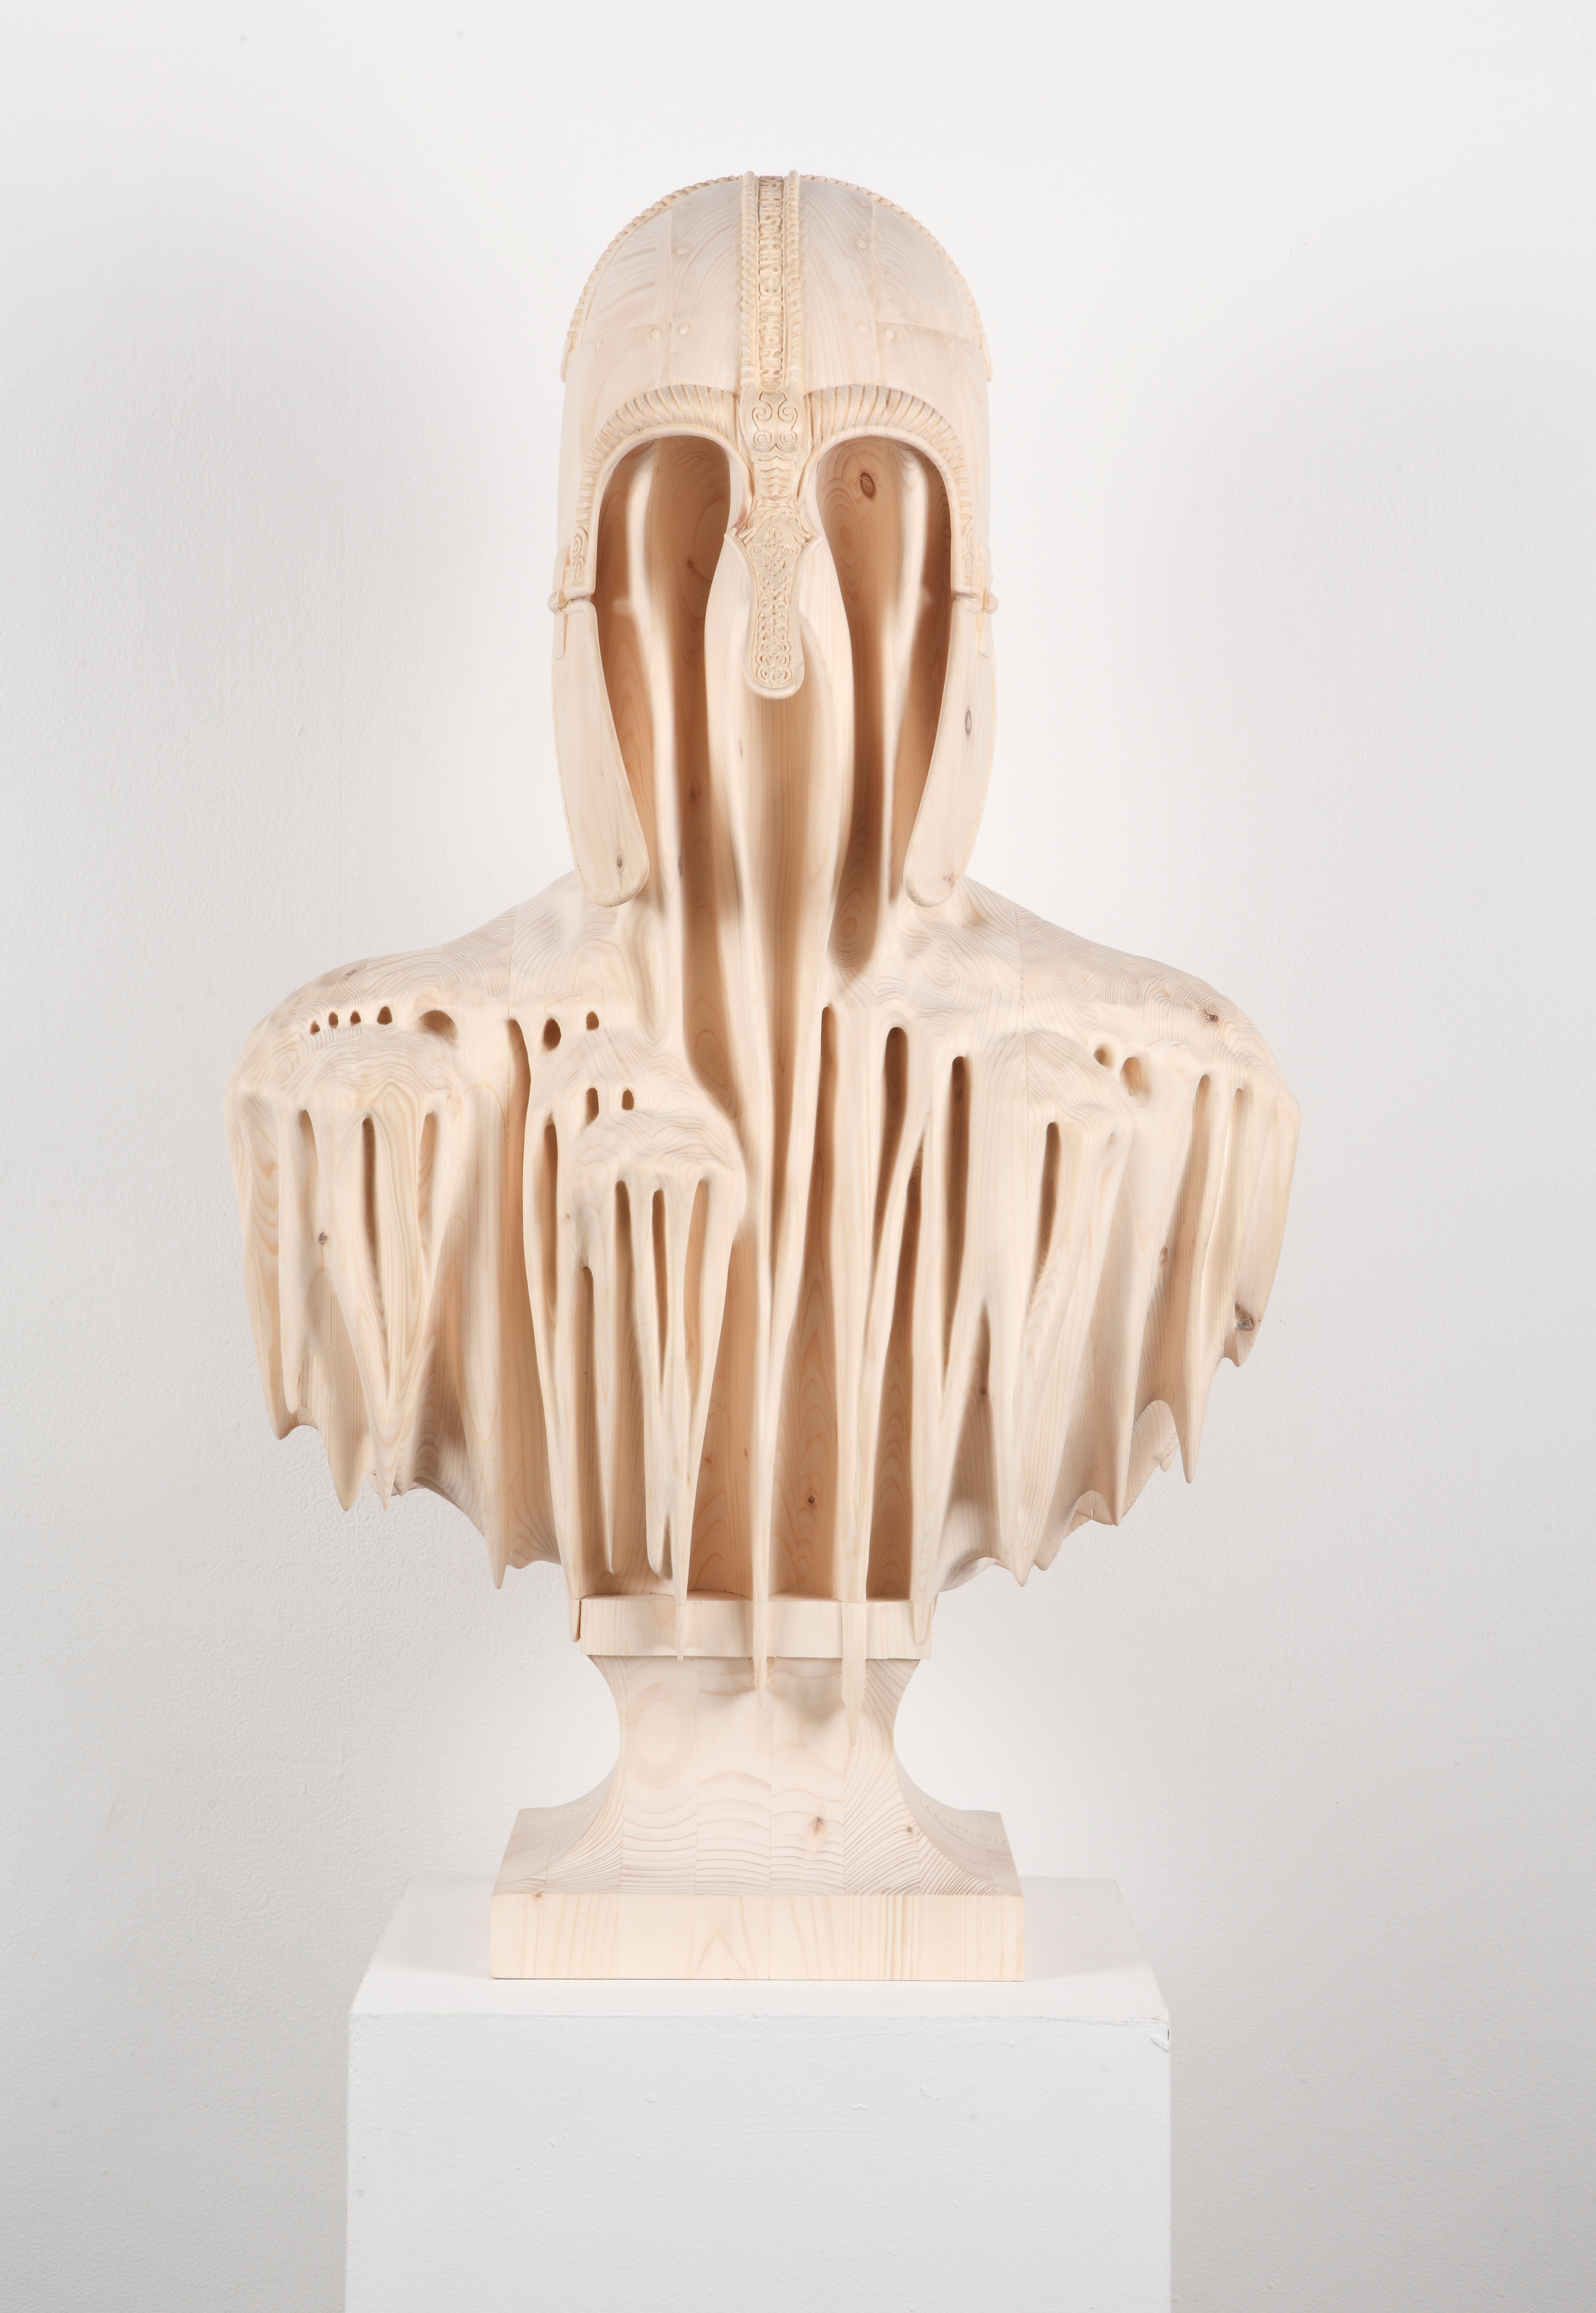 Exhibition of Monumental Wood Sculptures